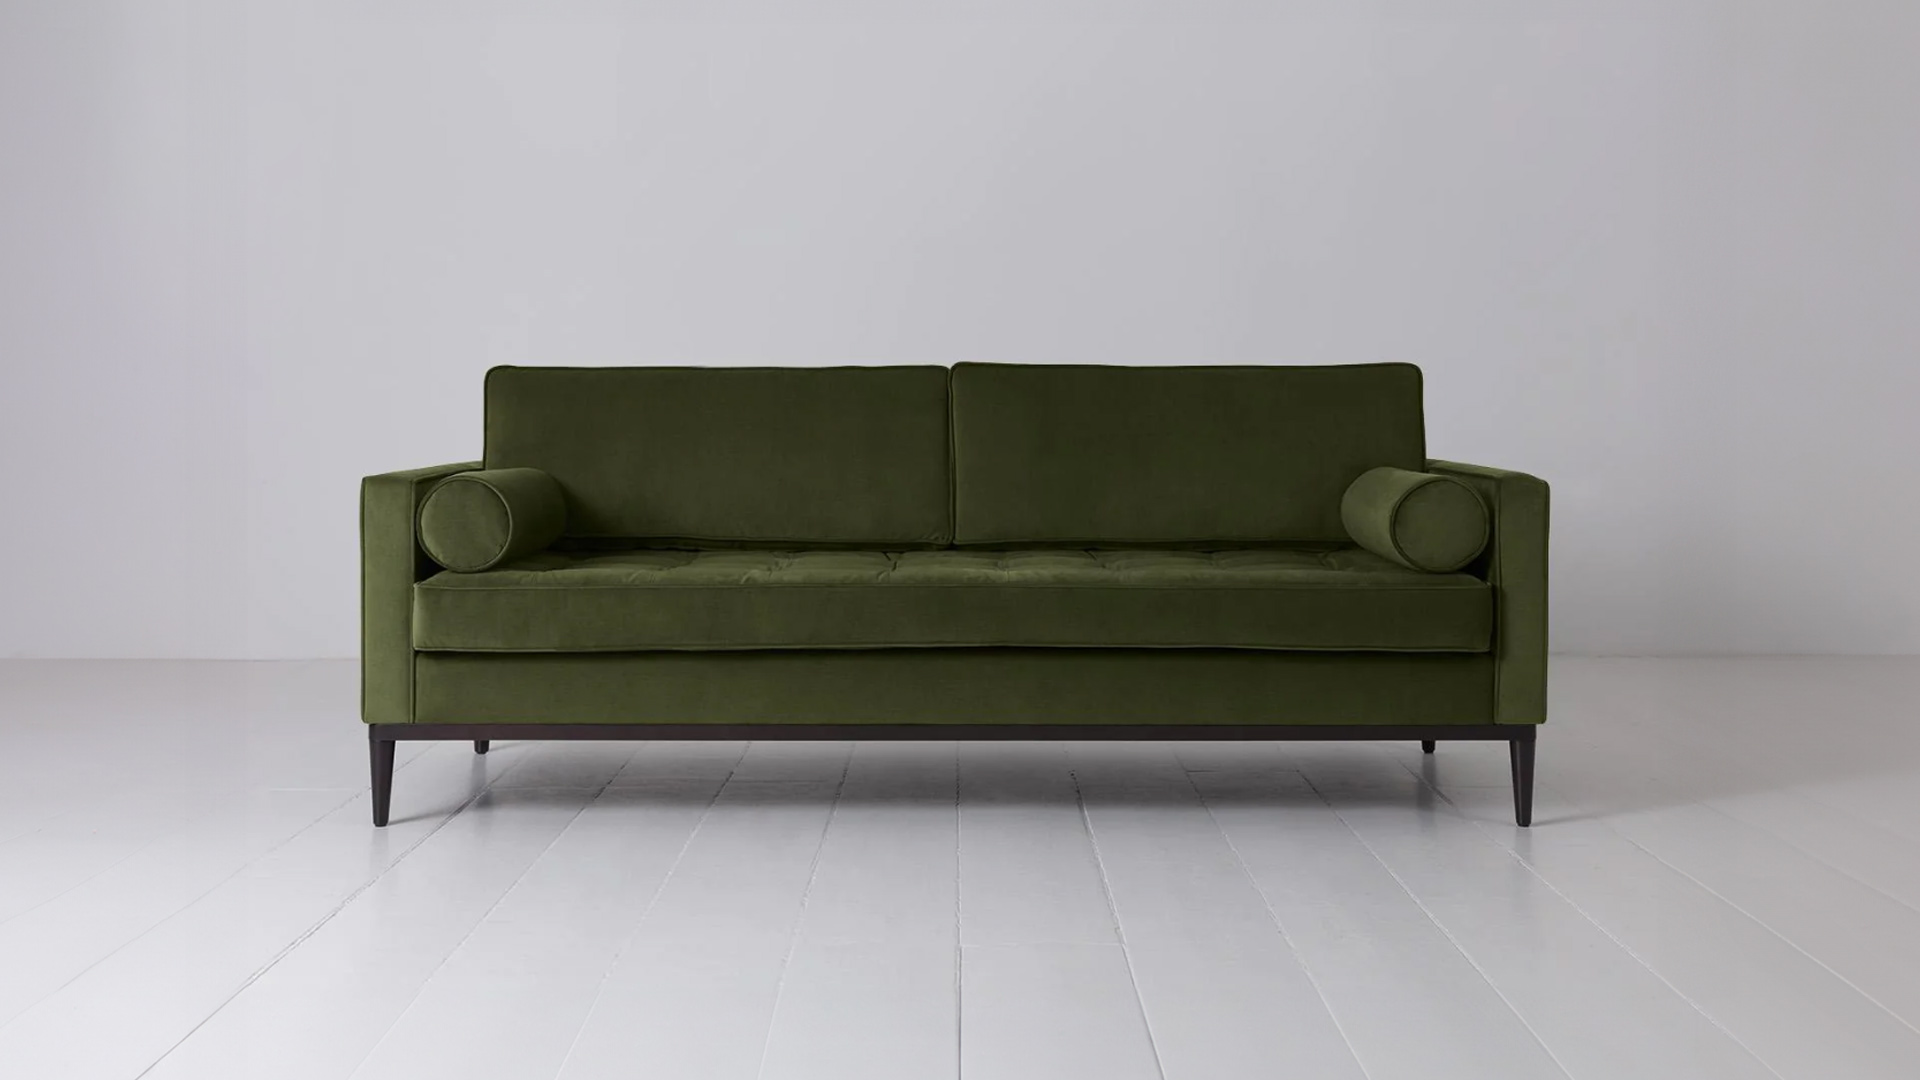 Green Copenhagen sofa is a contemporary 3 seat sofa inspired by the designs of the mid-century era